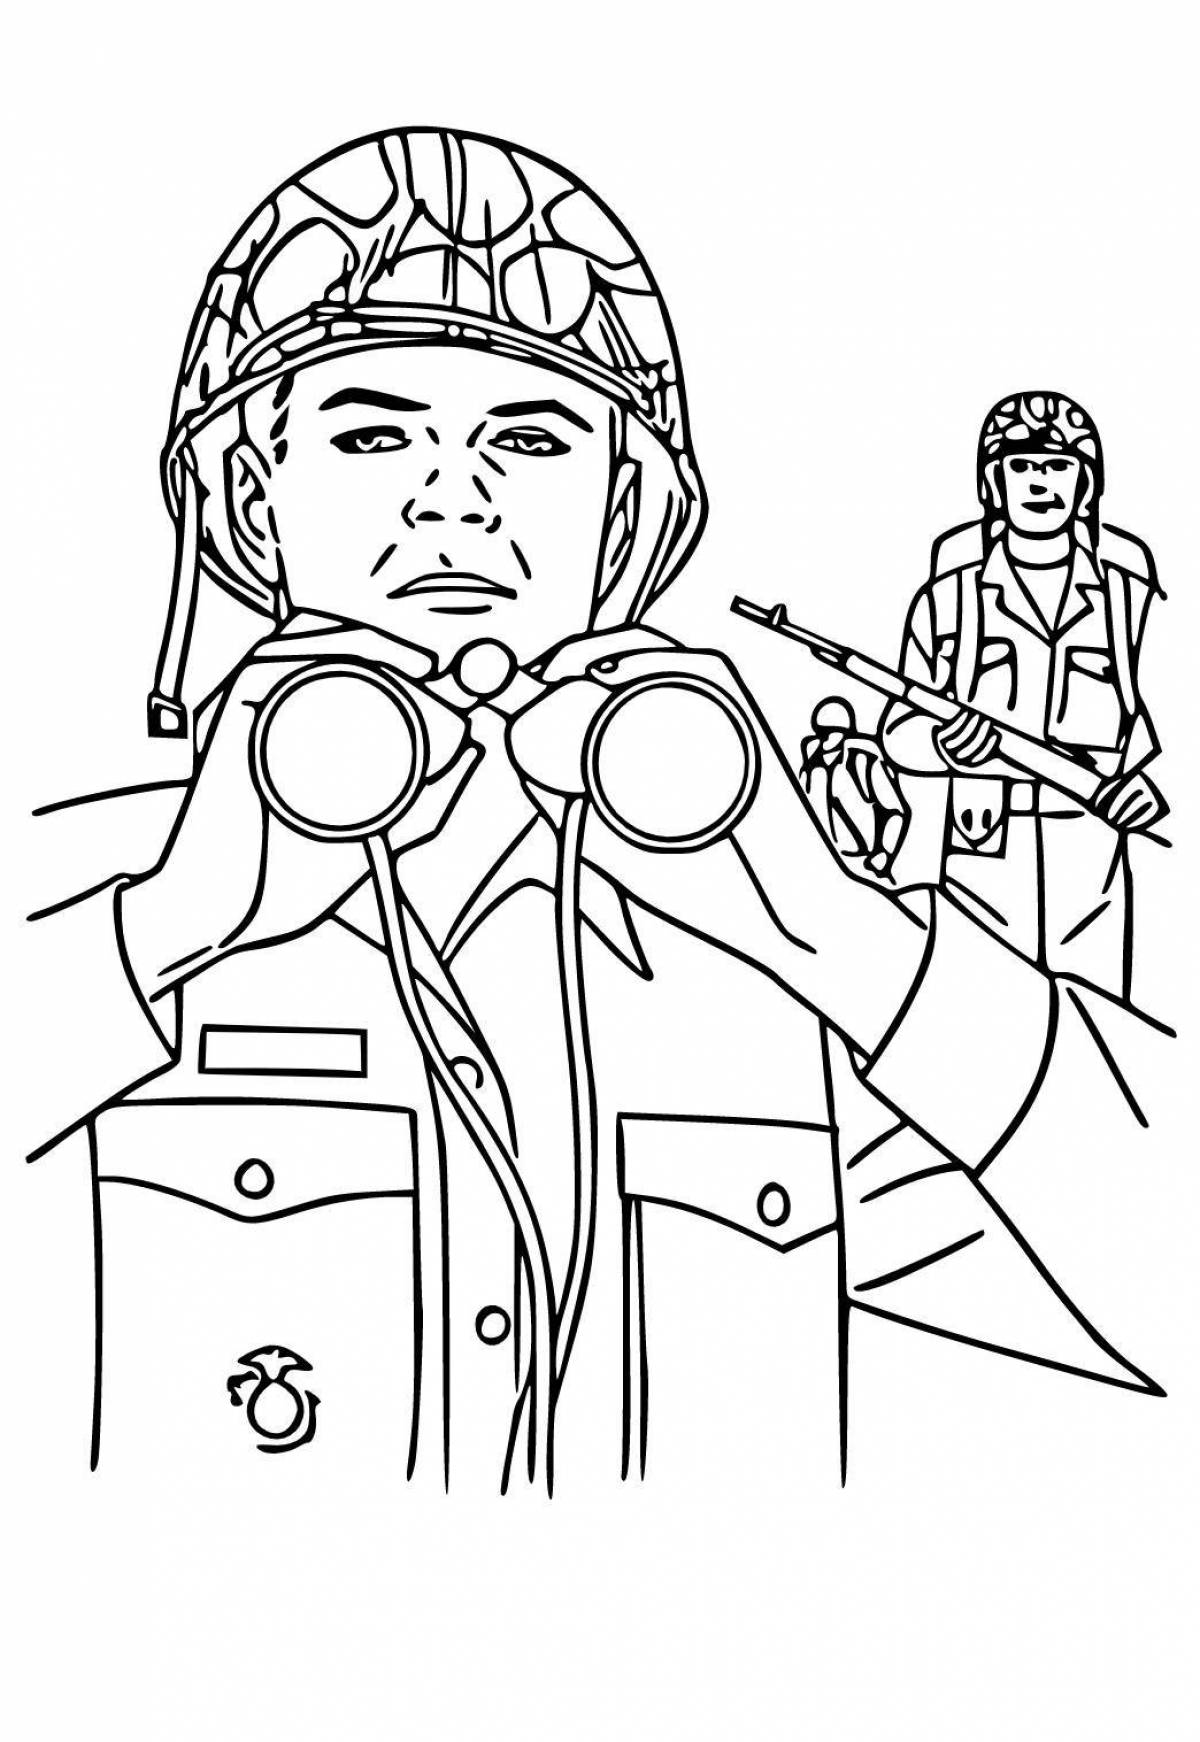 3rd grade colorful military coloring book